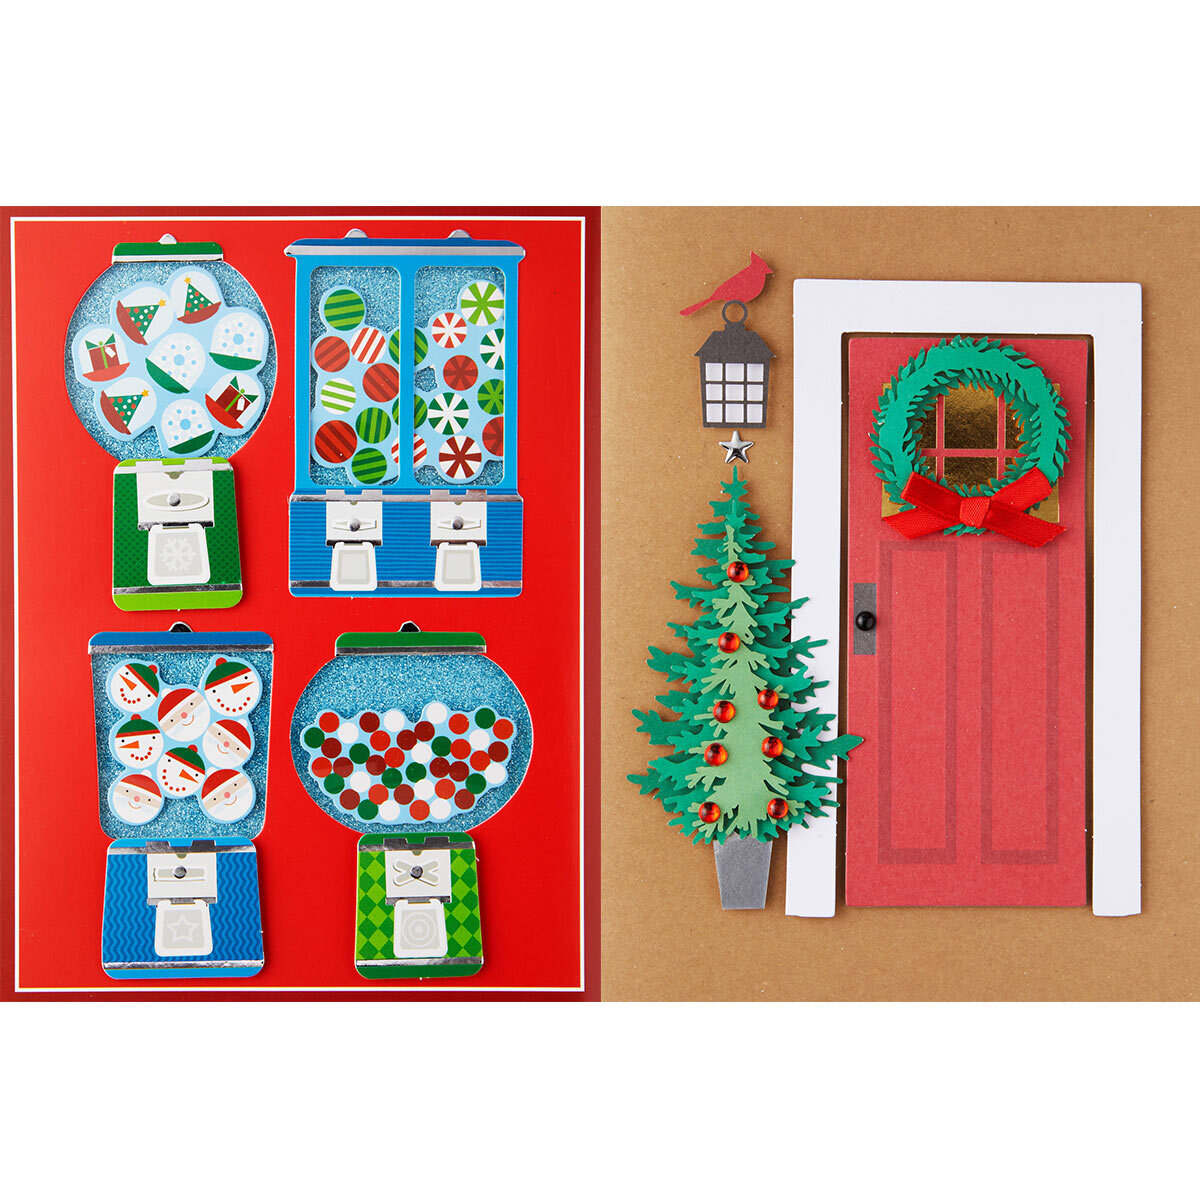 Buy 30 Pack Handmade Christmas Cards Combined Set3 Image at Costco.co.uk